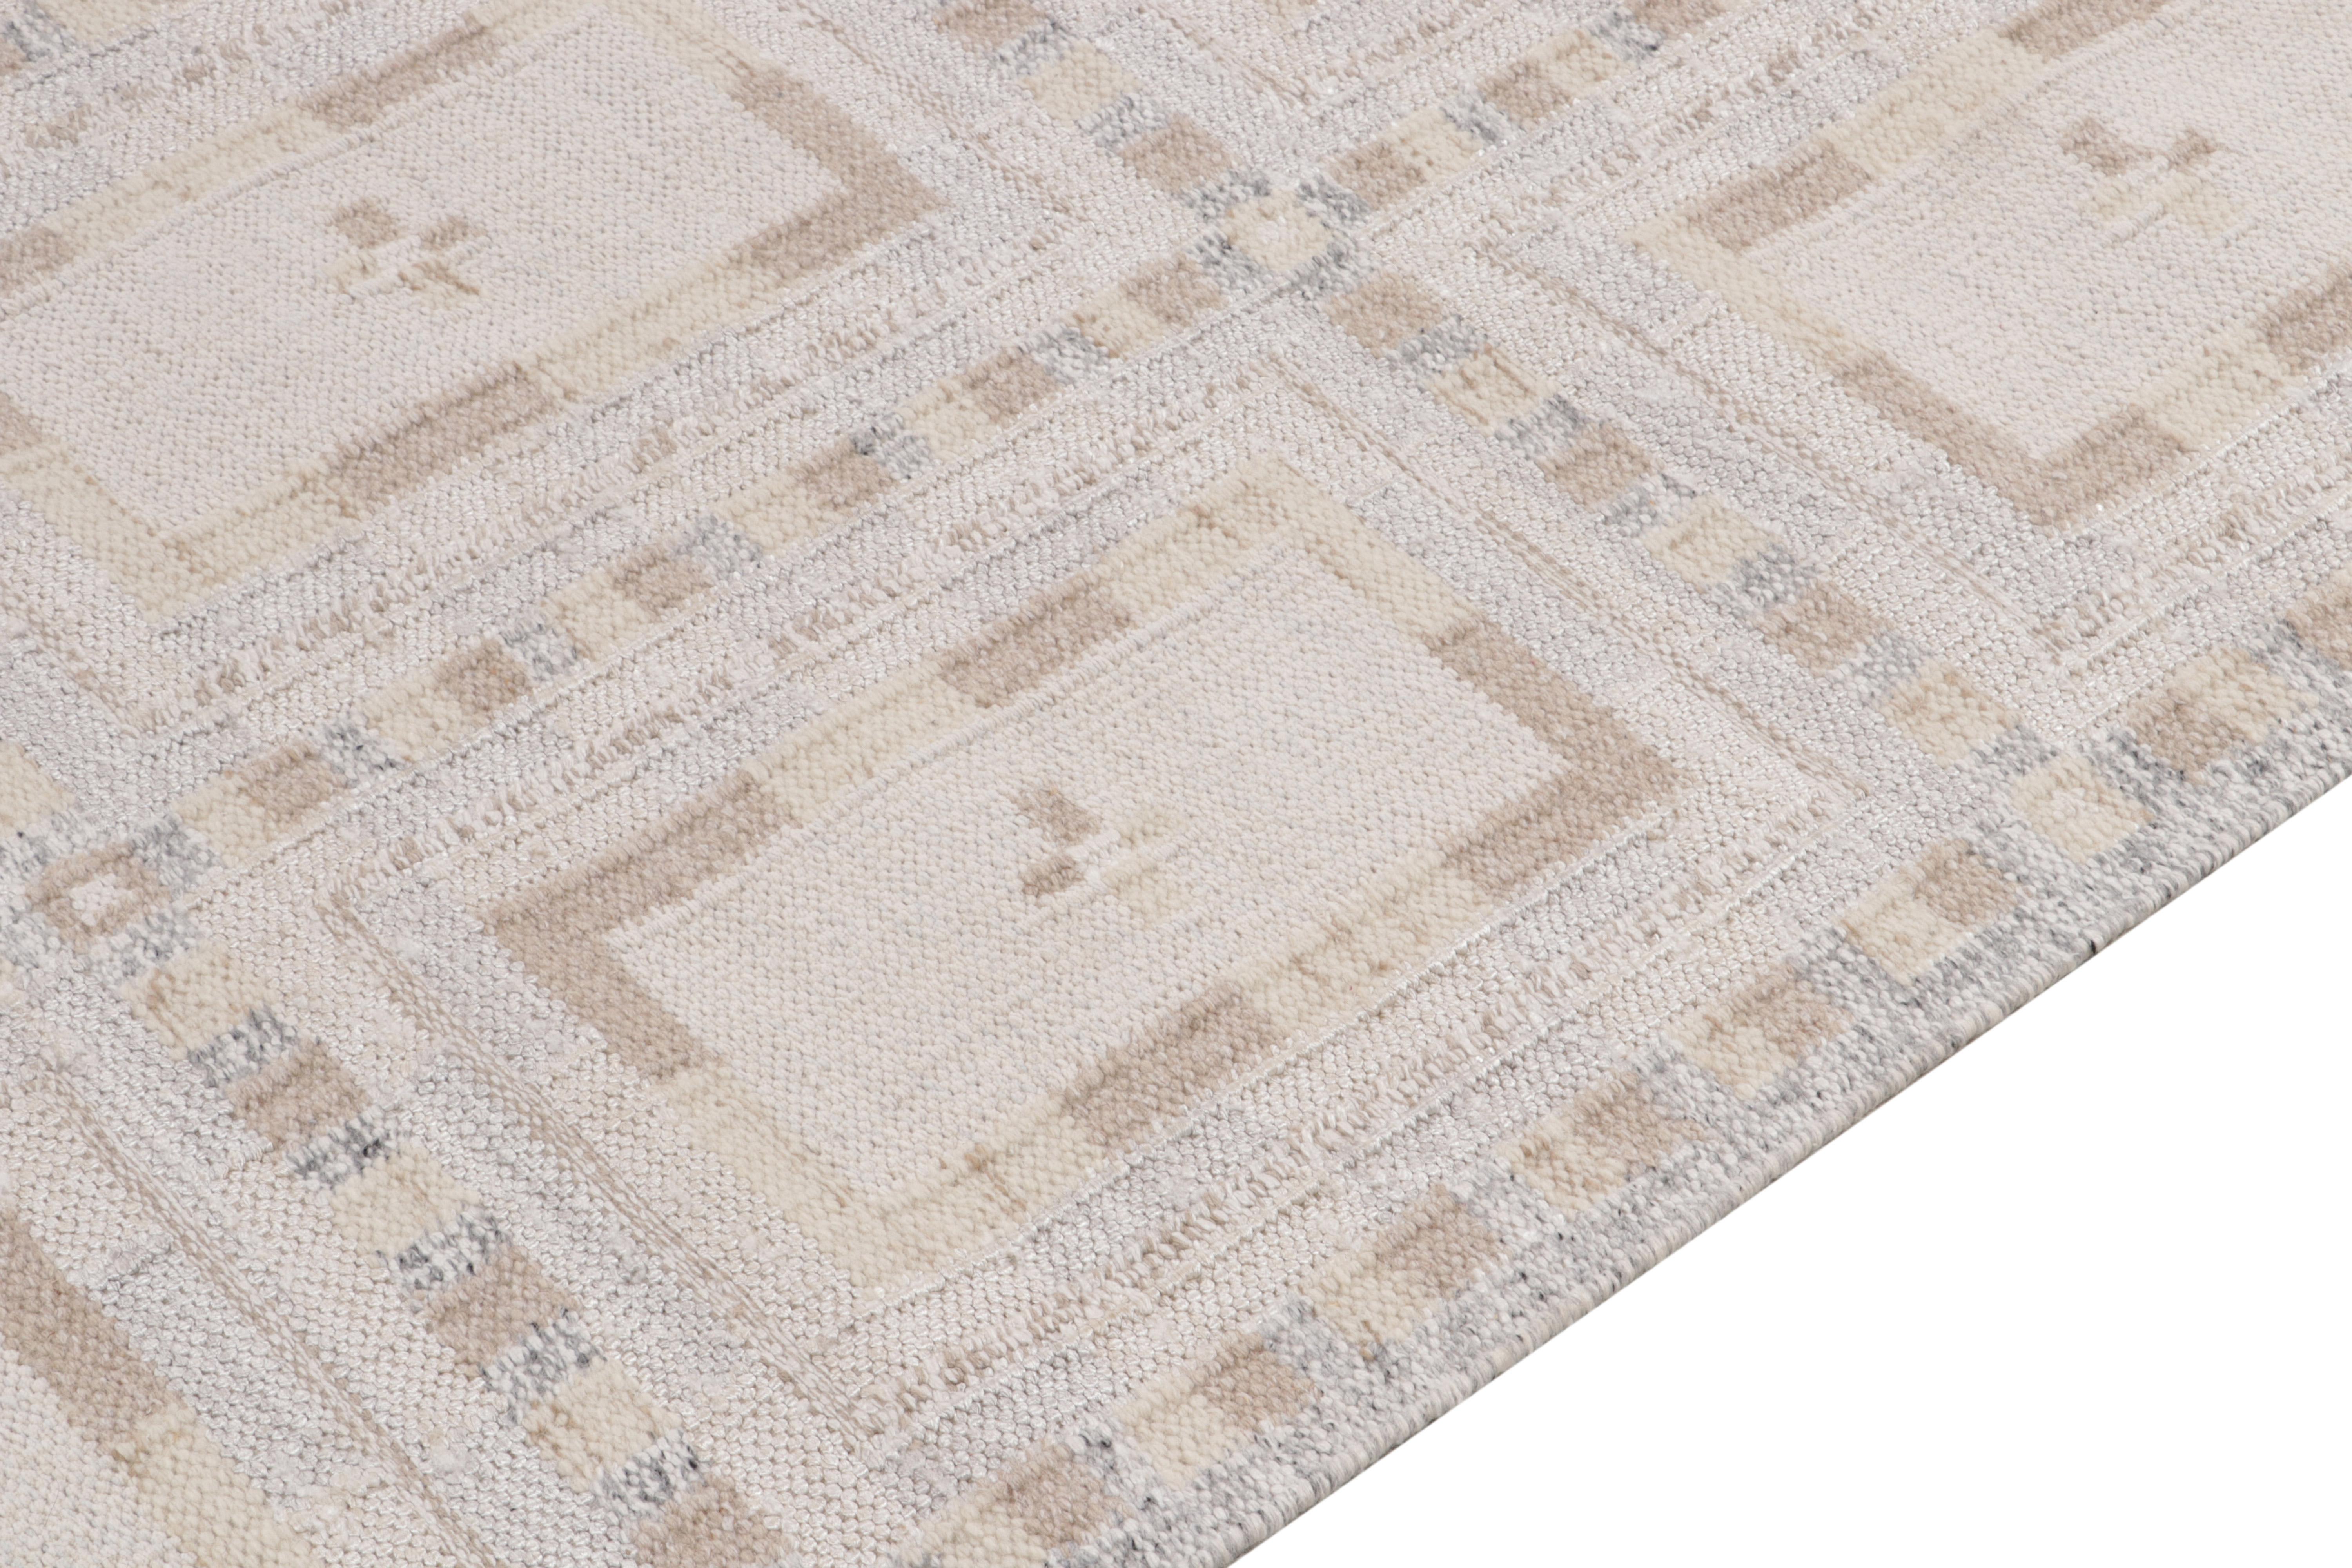 Hand-Knotted Scandinavian Style Kilim Rug in White, Beige Geometric Pattern by Rug & Kilim For Sale